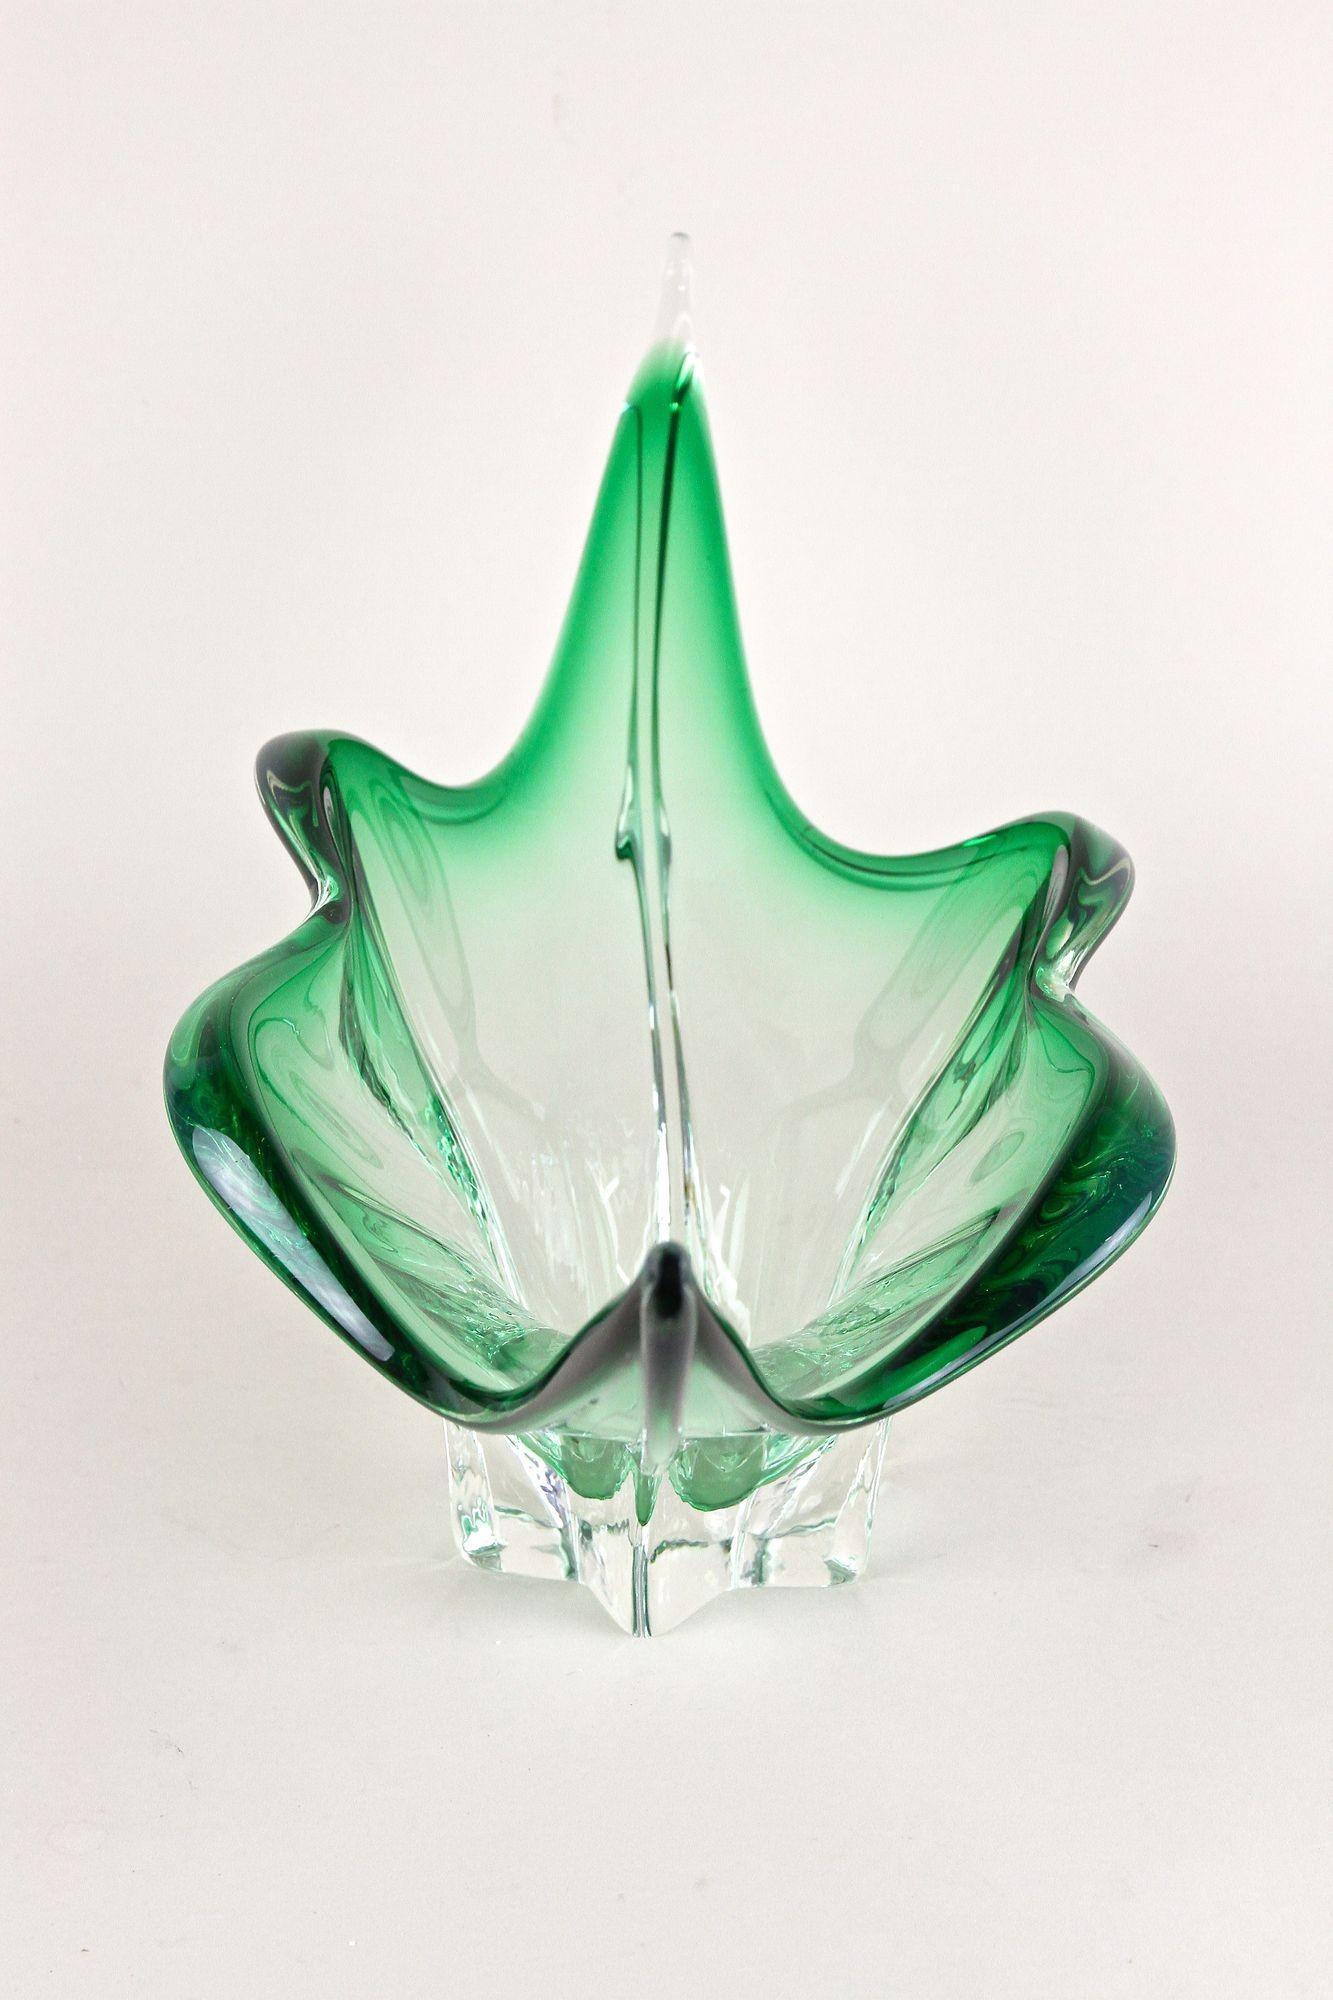 Mid Century Modern Murano Glass Bowl, Green/ Clear Tones - Italy ca. 1960 For Sale 2